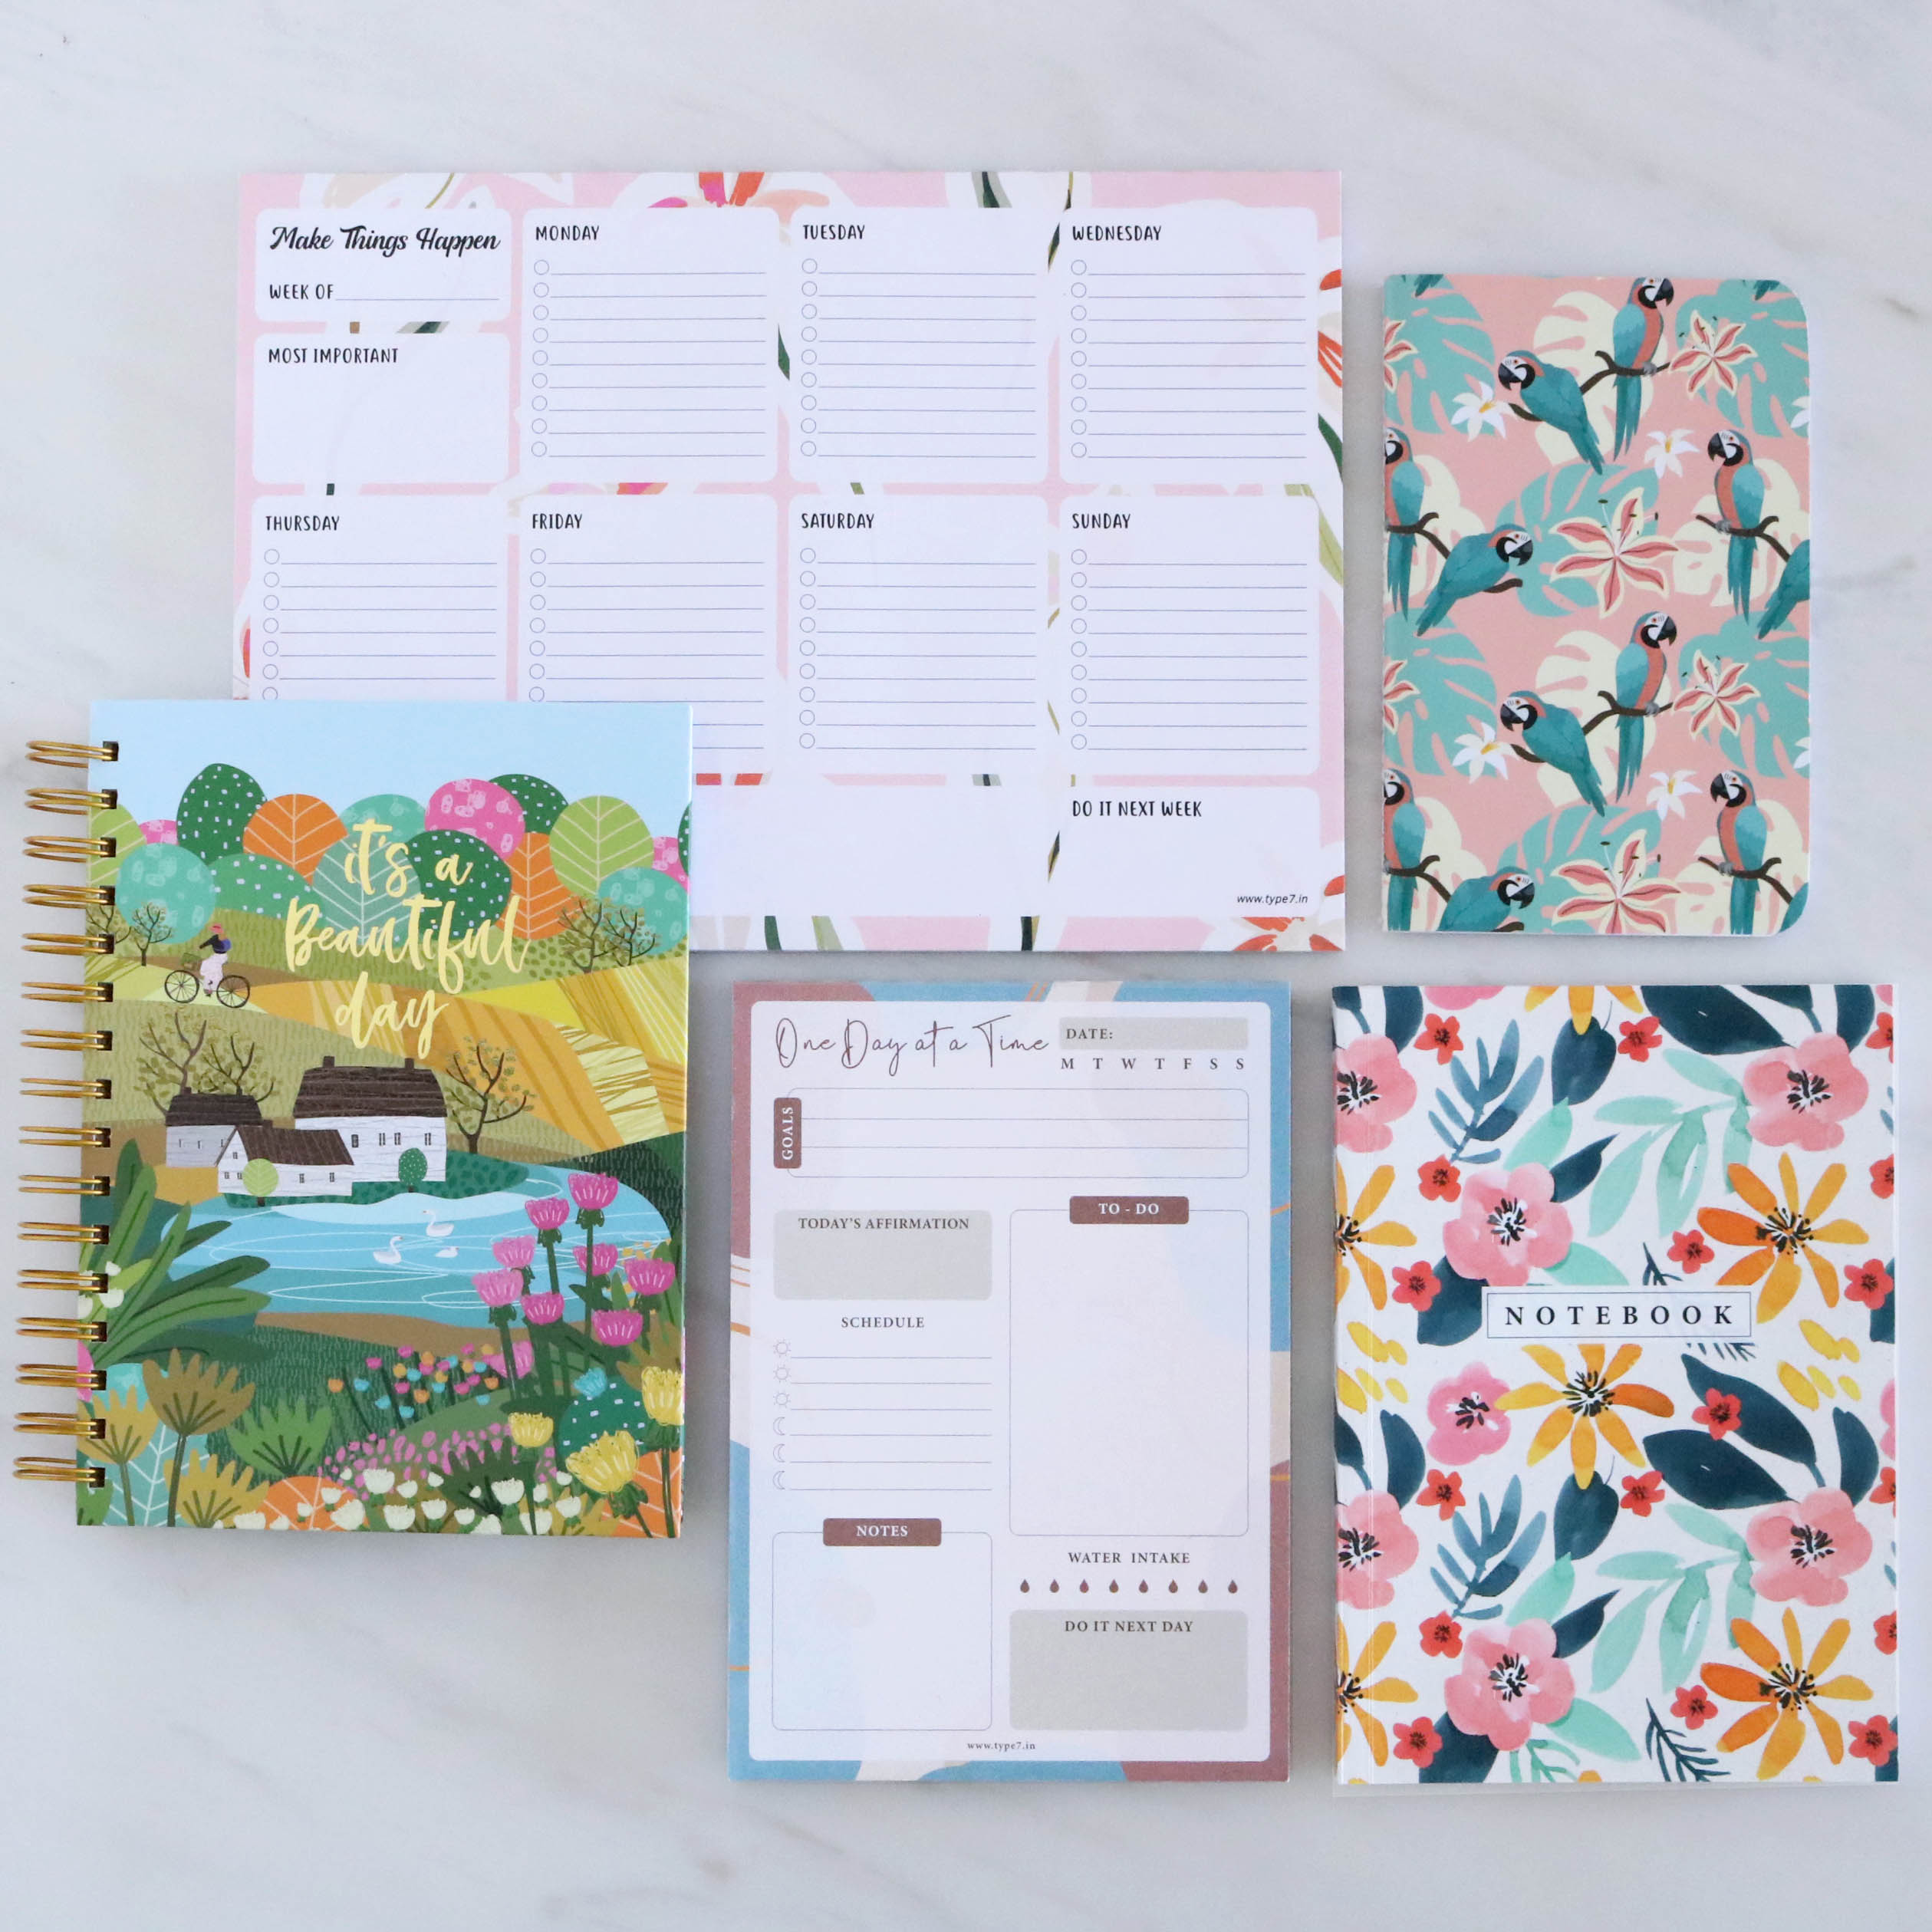 It's A Beautiful Day - Ultimate Stationery Combo